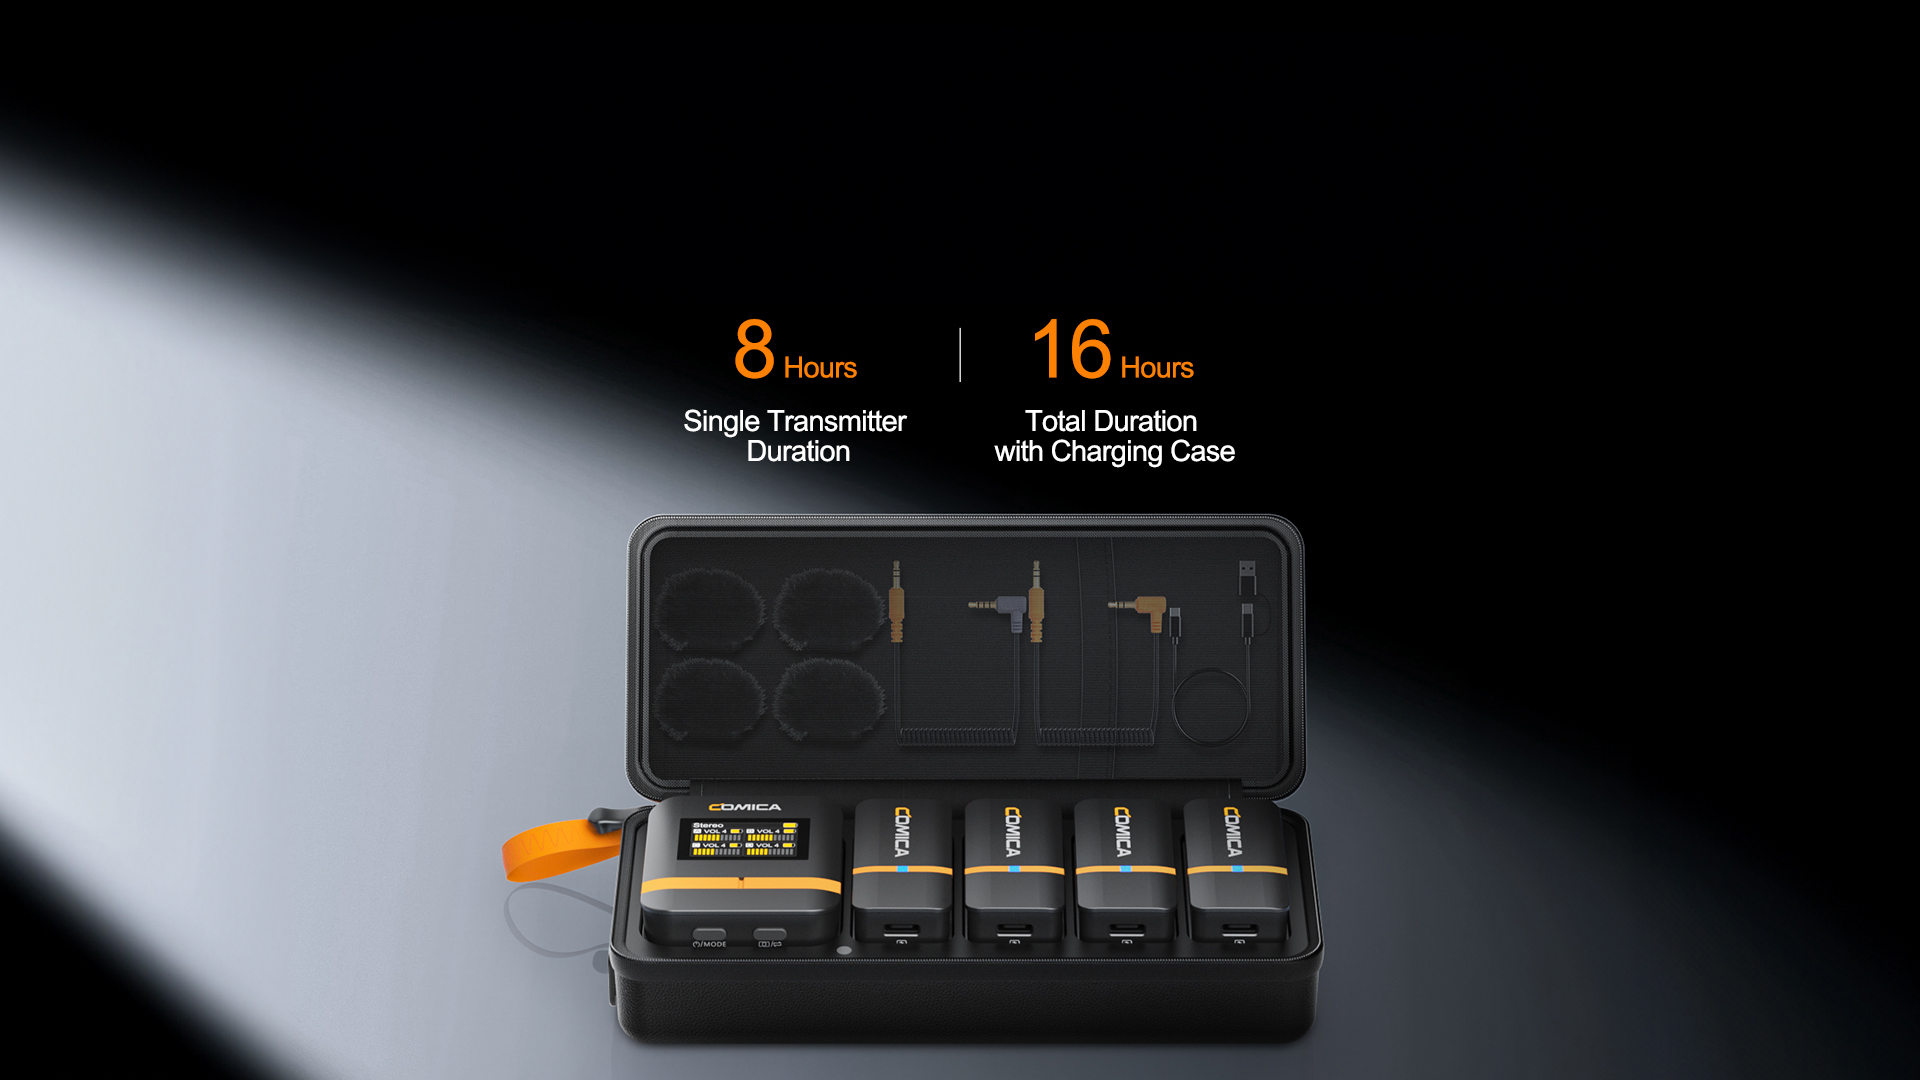 Charging & Storing Case, Duration Up to 16H